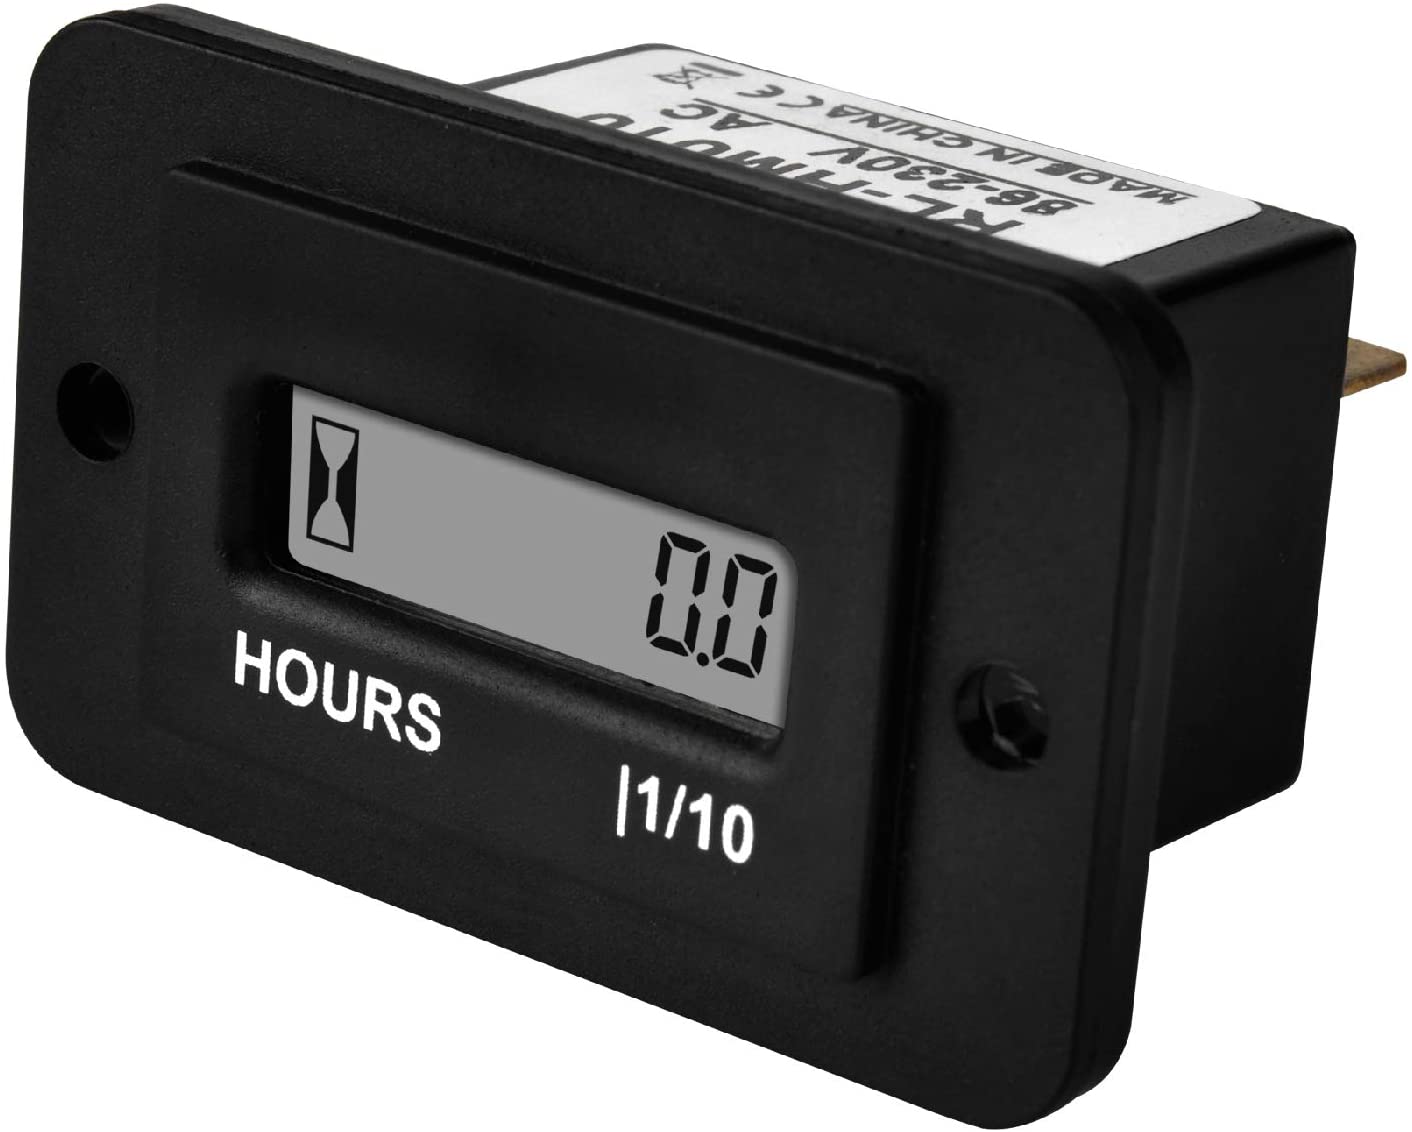 Jayron Rectangular LCD Digital Hour Meter AC 86-230V Resettable No Battery Required,for Small Engine Quad Bike Motorcycle Lawn Mower Snowmobile Motocross Chainsaw